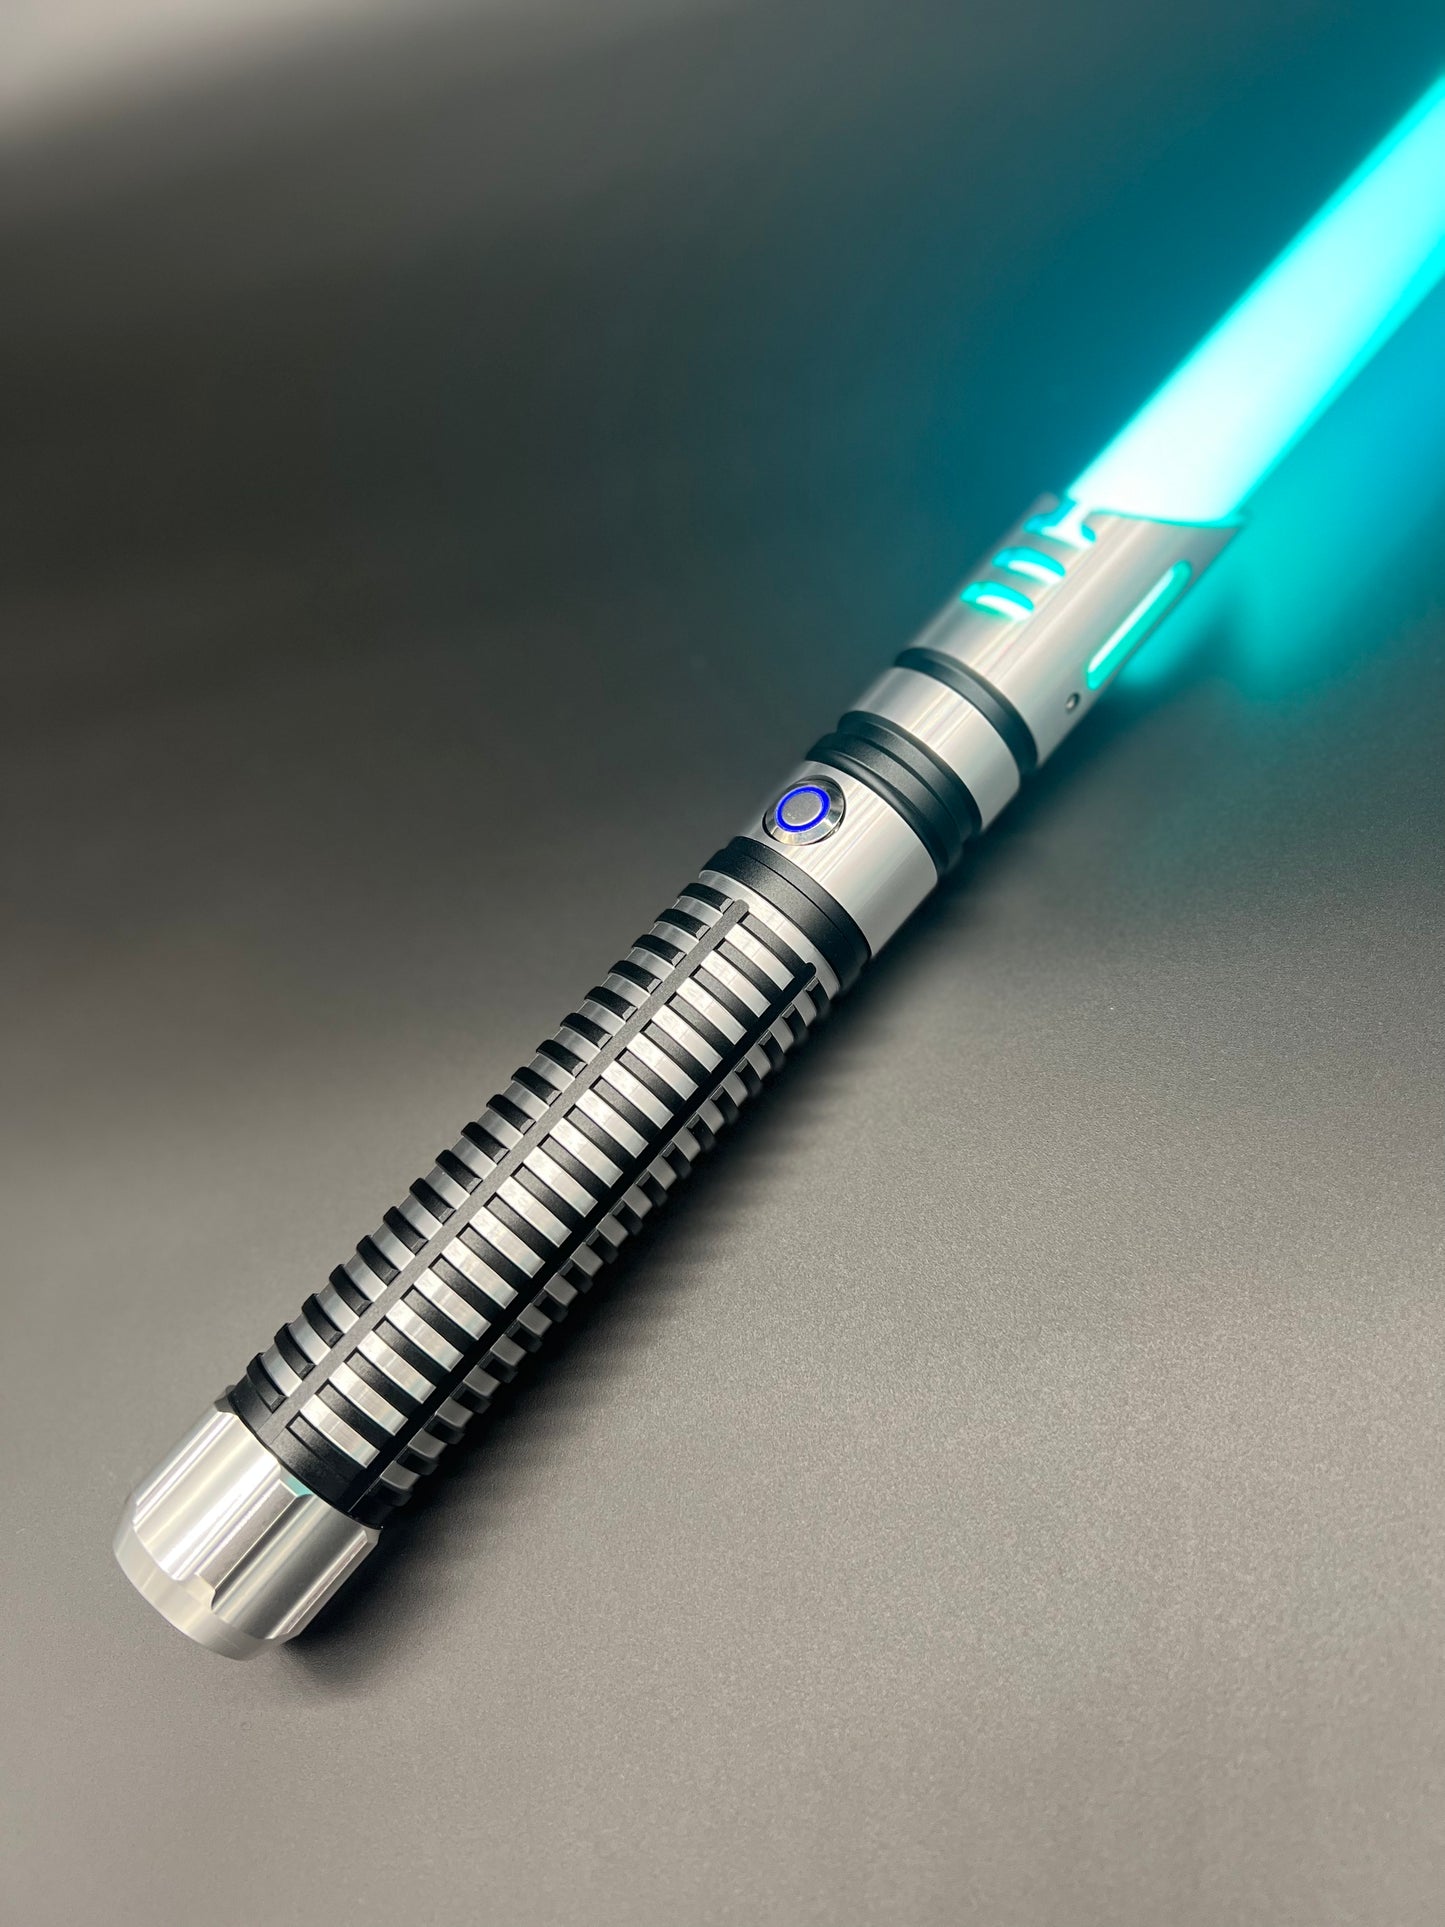 THE SORZUS SYN LIGHTSABER